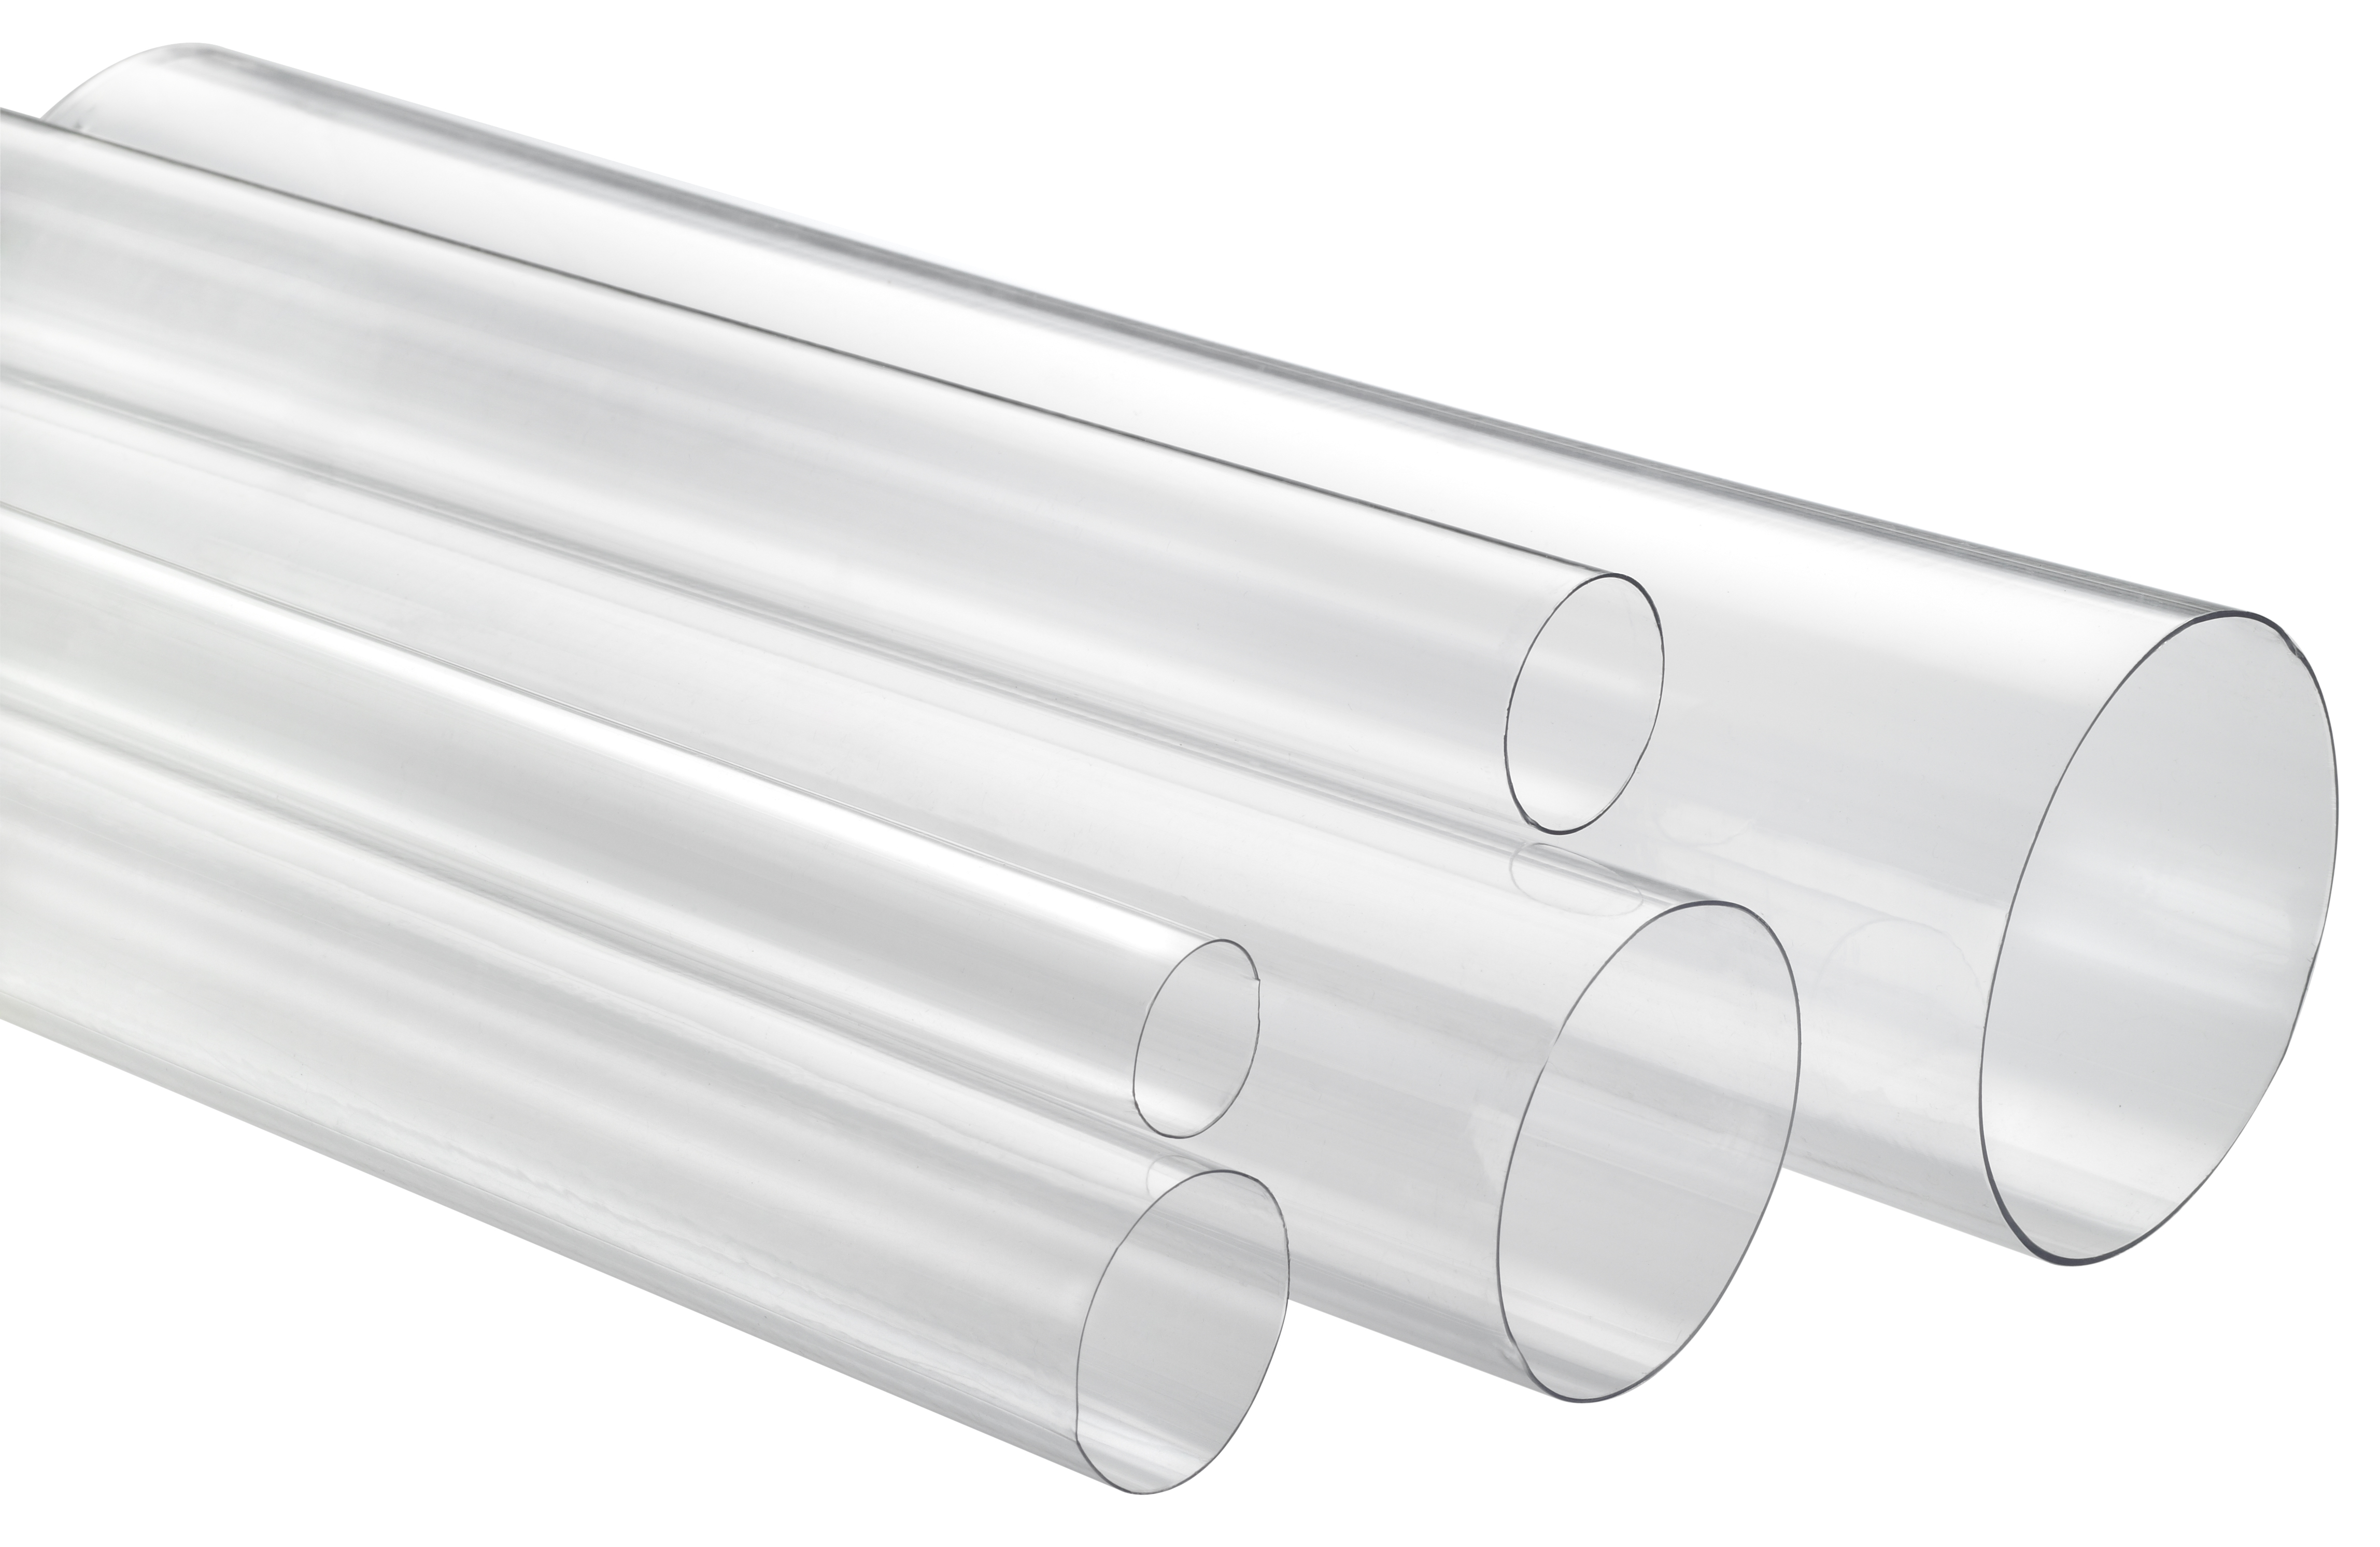 5 Foot of Polycarbonate Round Clear Tube/Tubing 2.50 x 2.375 -2176 2 1/2 x 2 3/8 